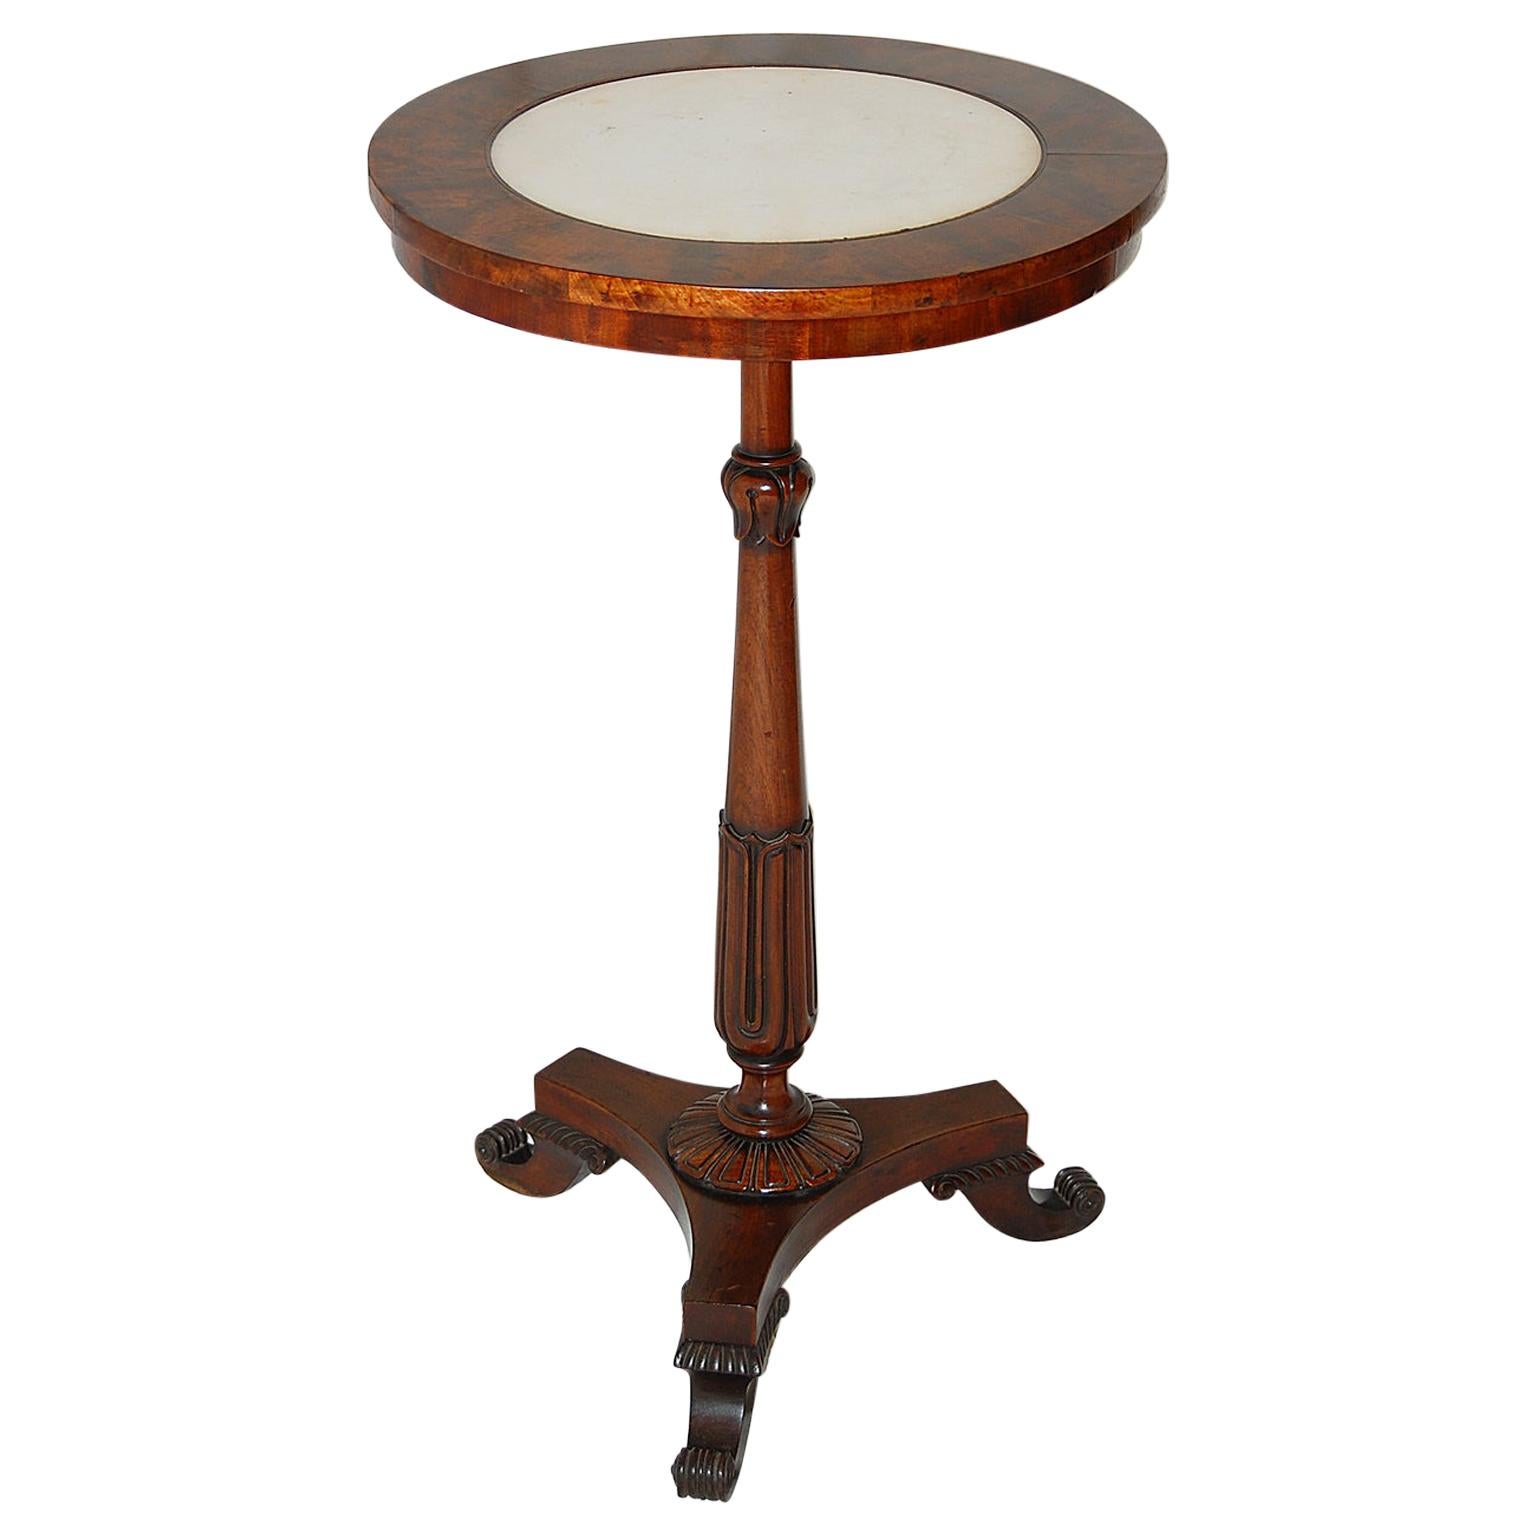 English Regency Period Pedestal Table with Marble Inset and Carved Base